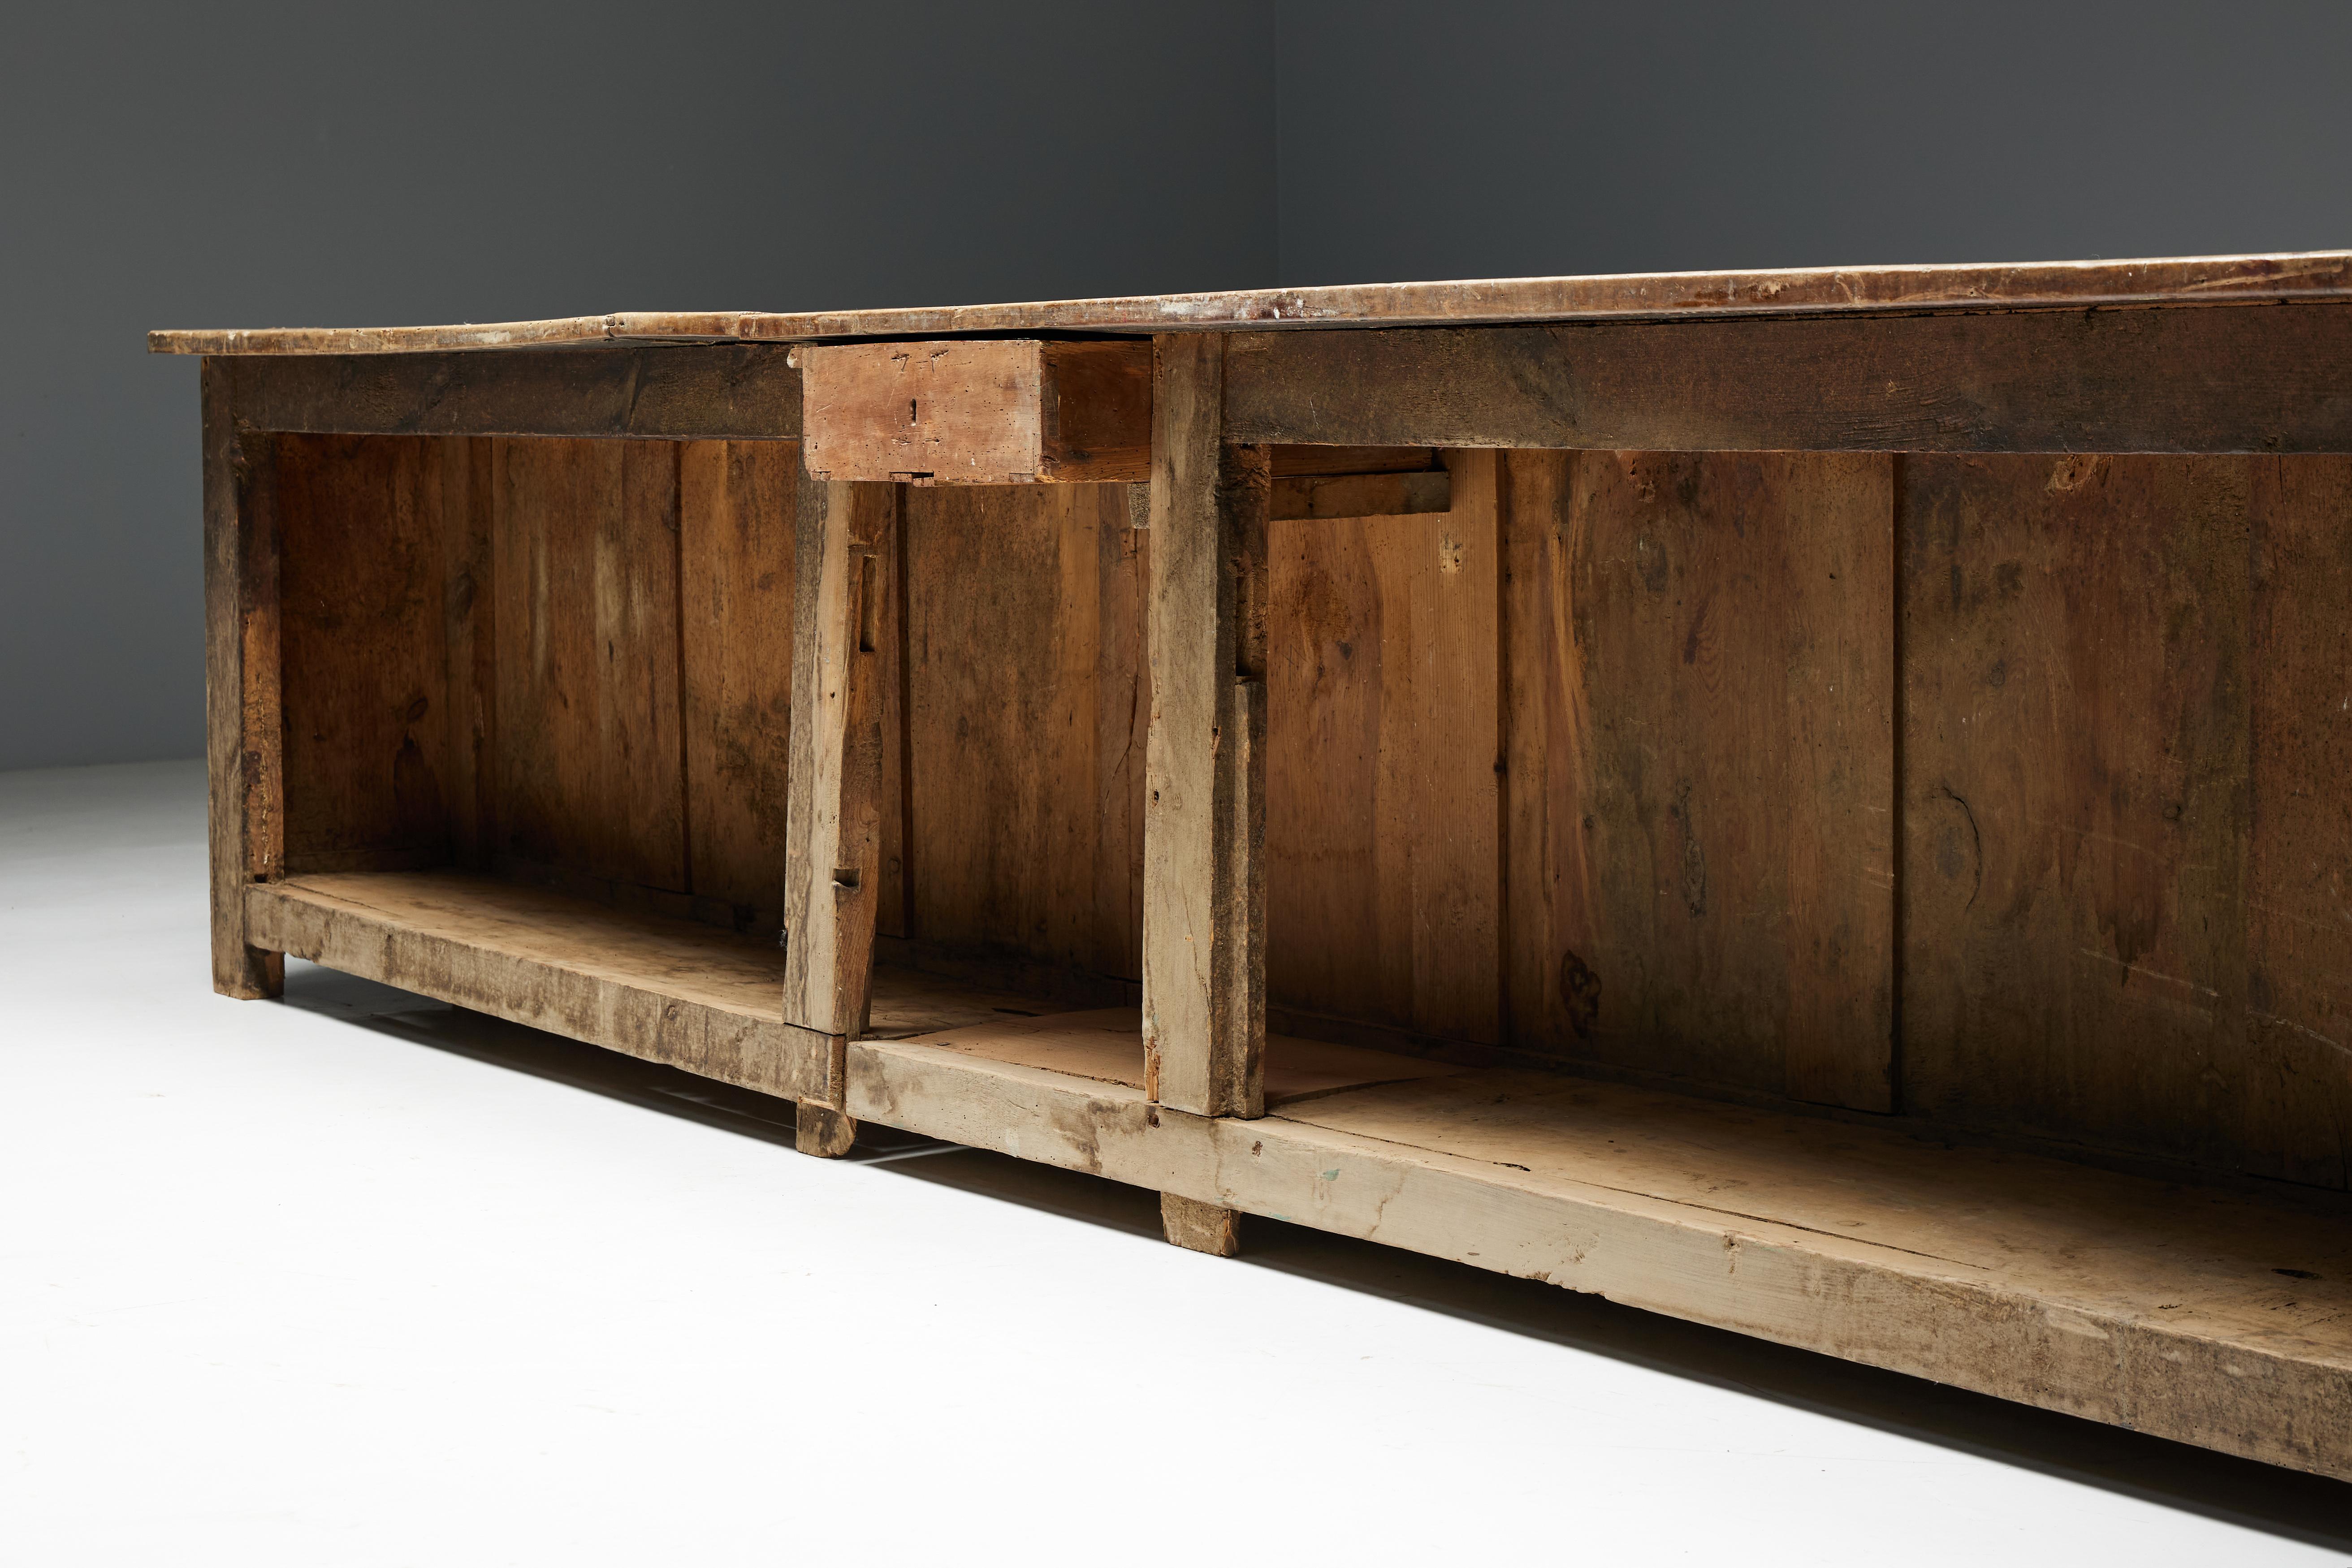 Wood Rustic Art Populaire Freestanding Bar Counter, France, 19th Century For Sale